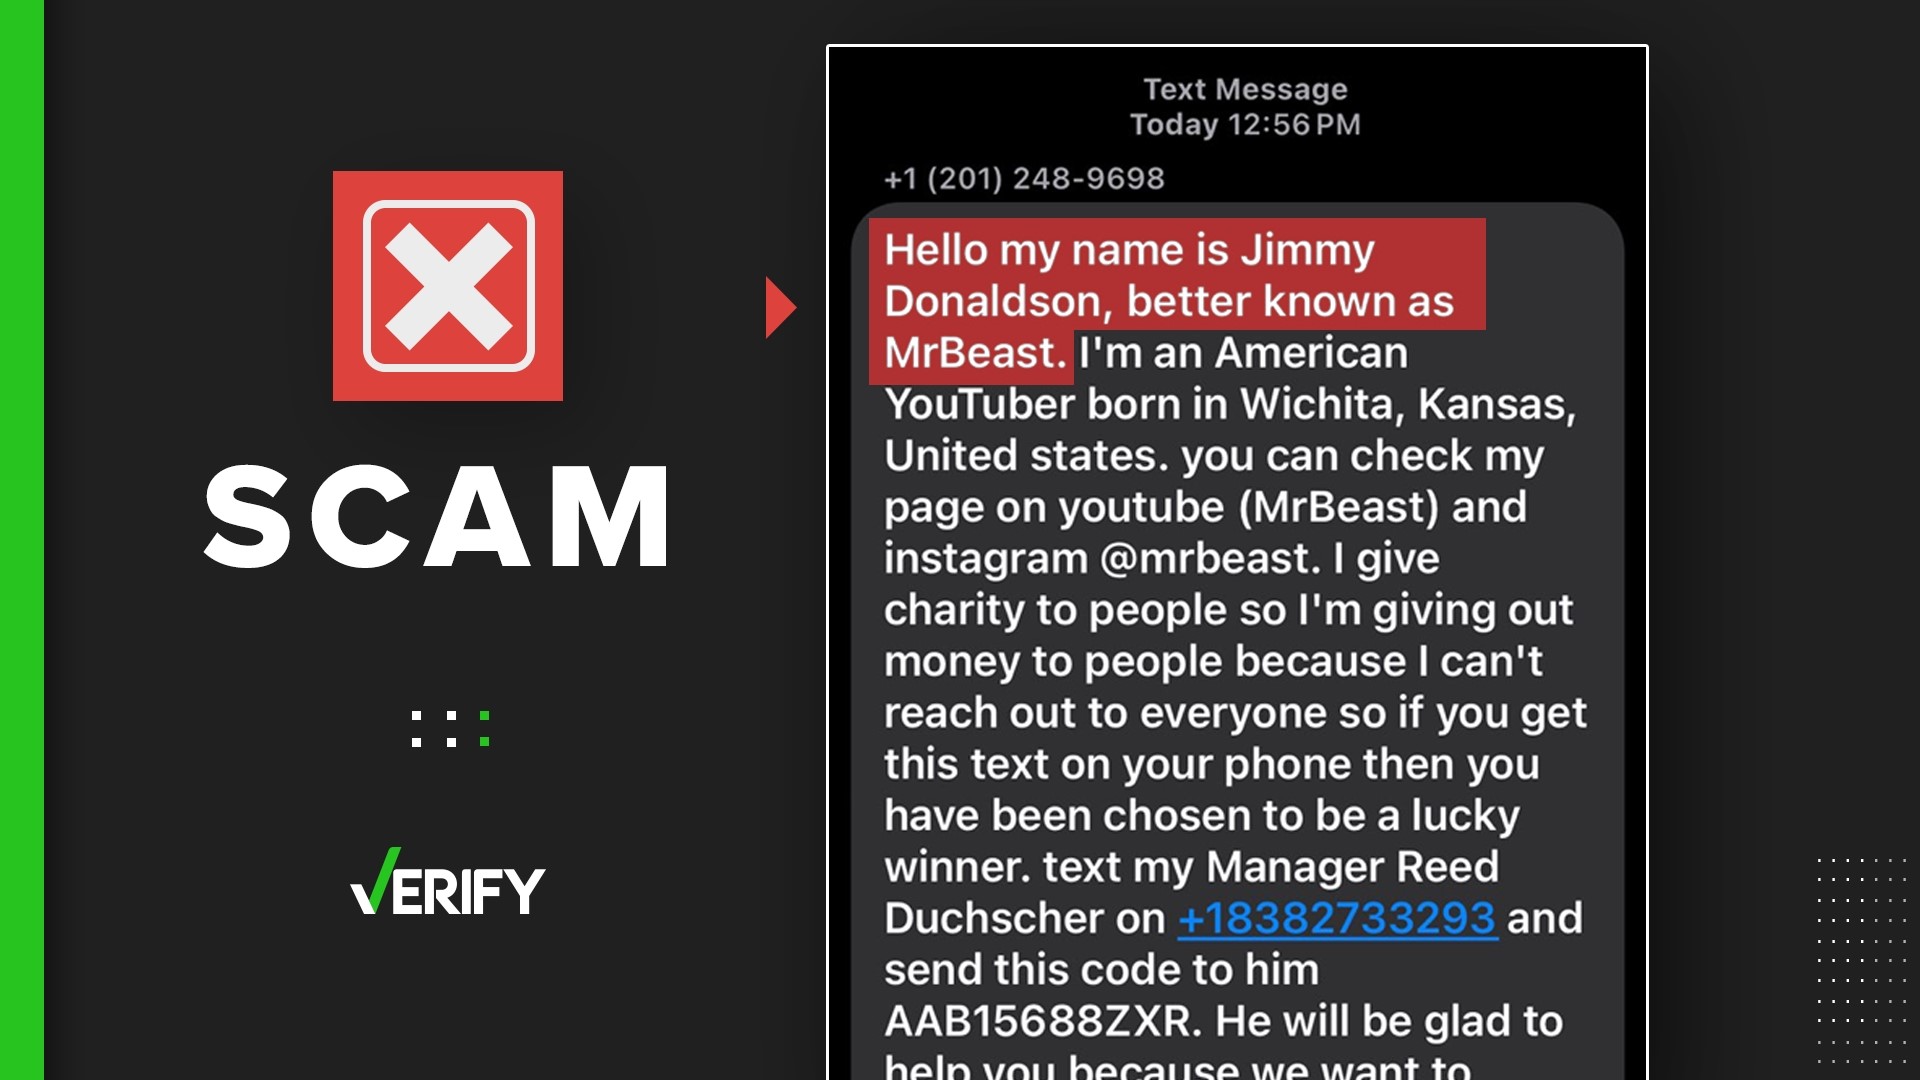 YouTuber MrBeast says that posts using his name and image for giveaways are scams. The fake messages and posts online actually seek to steal your money.